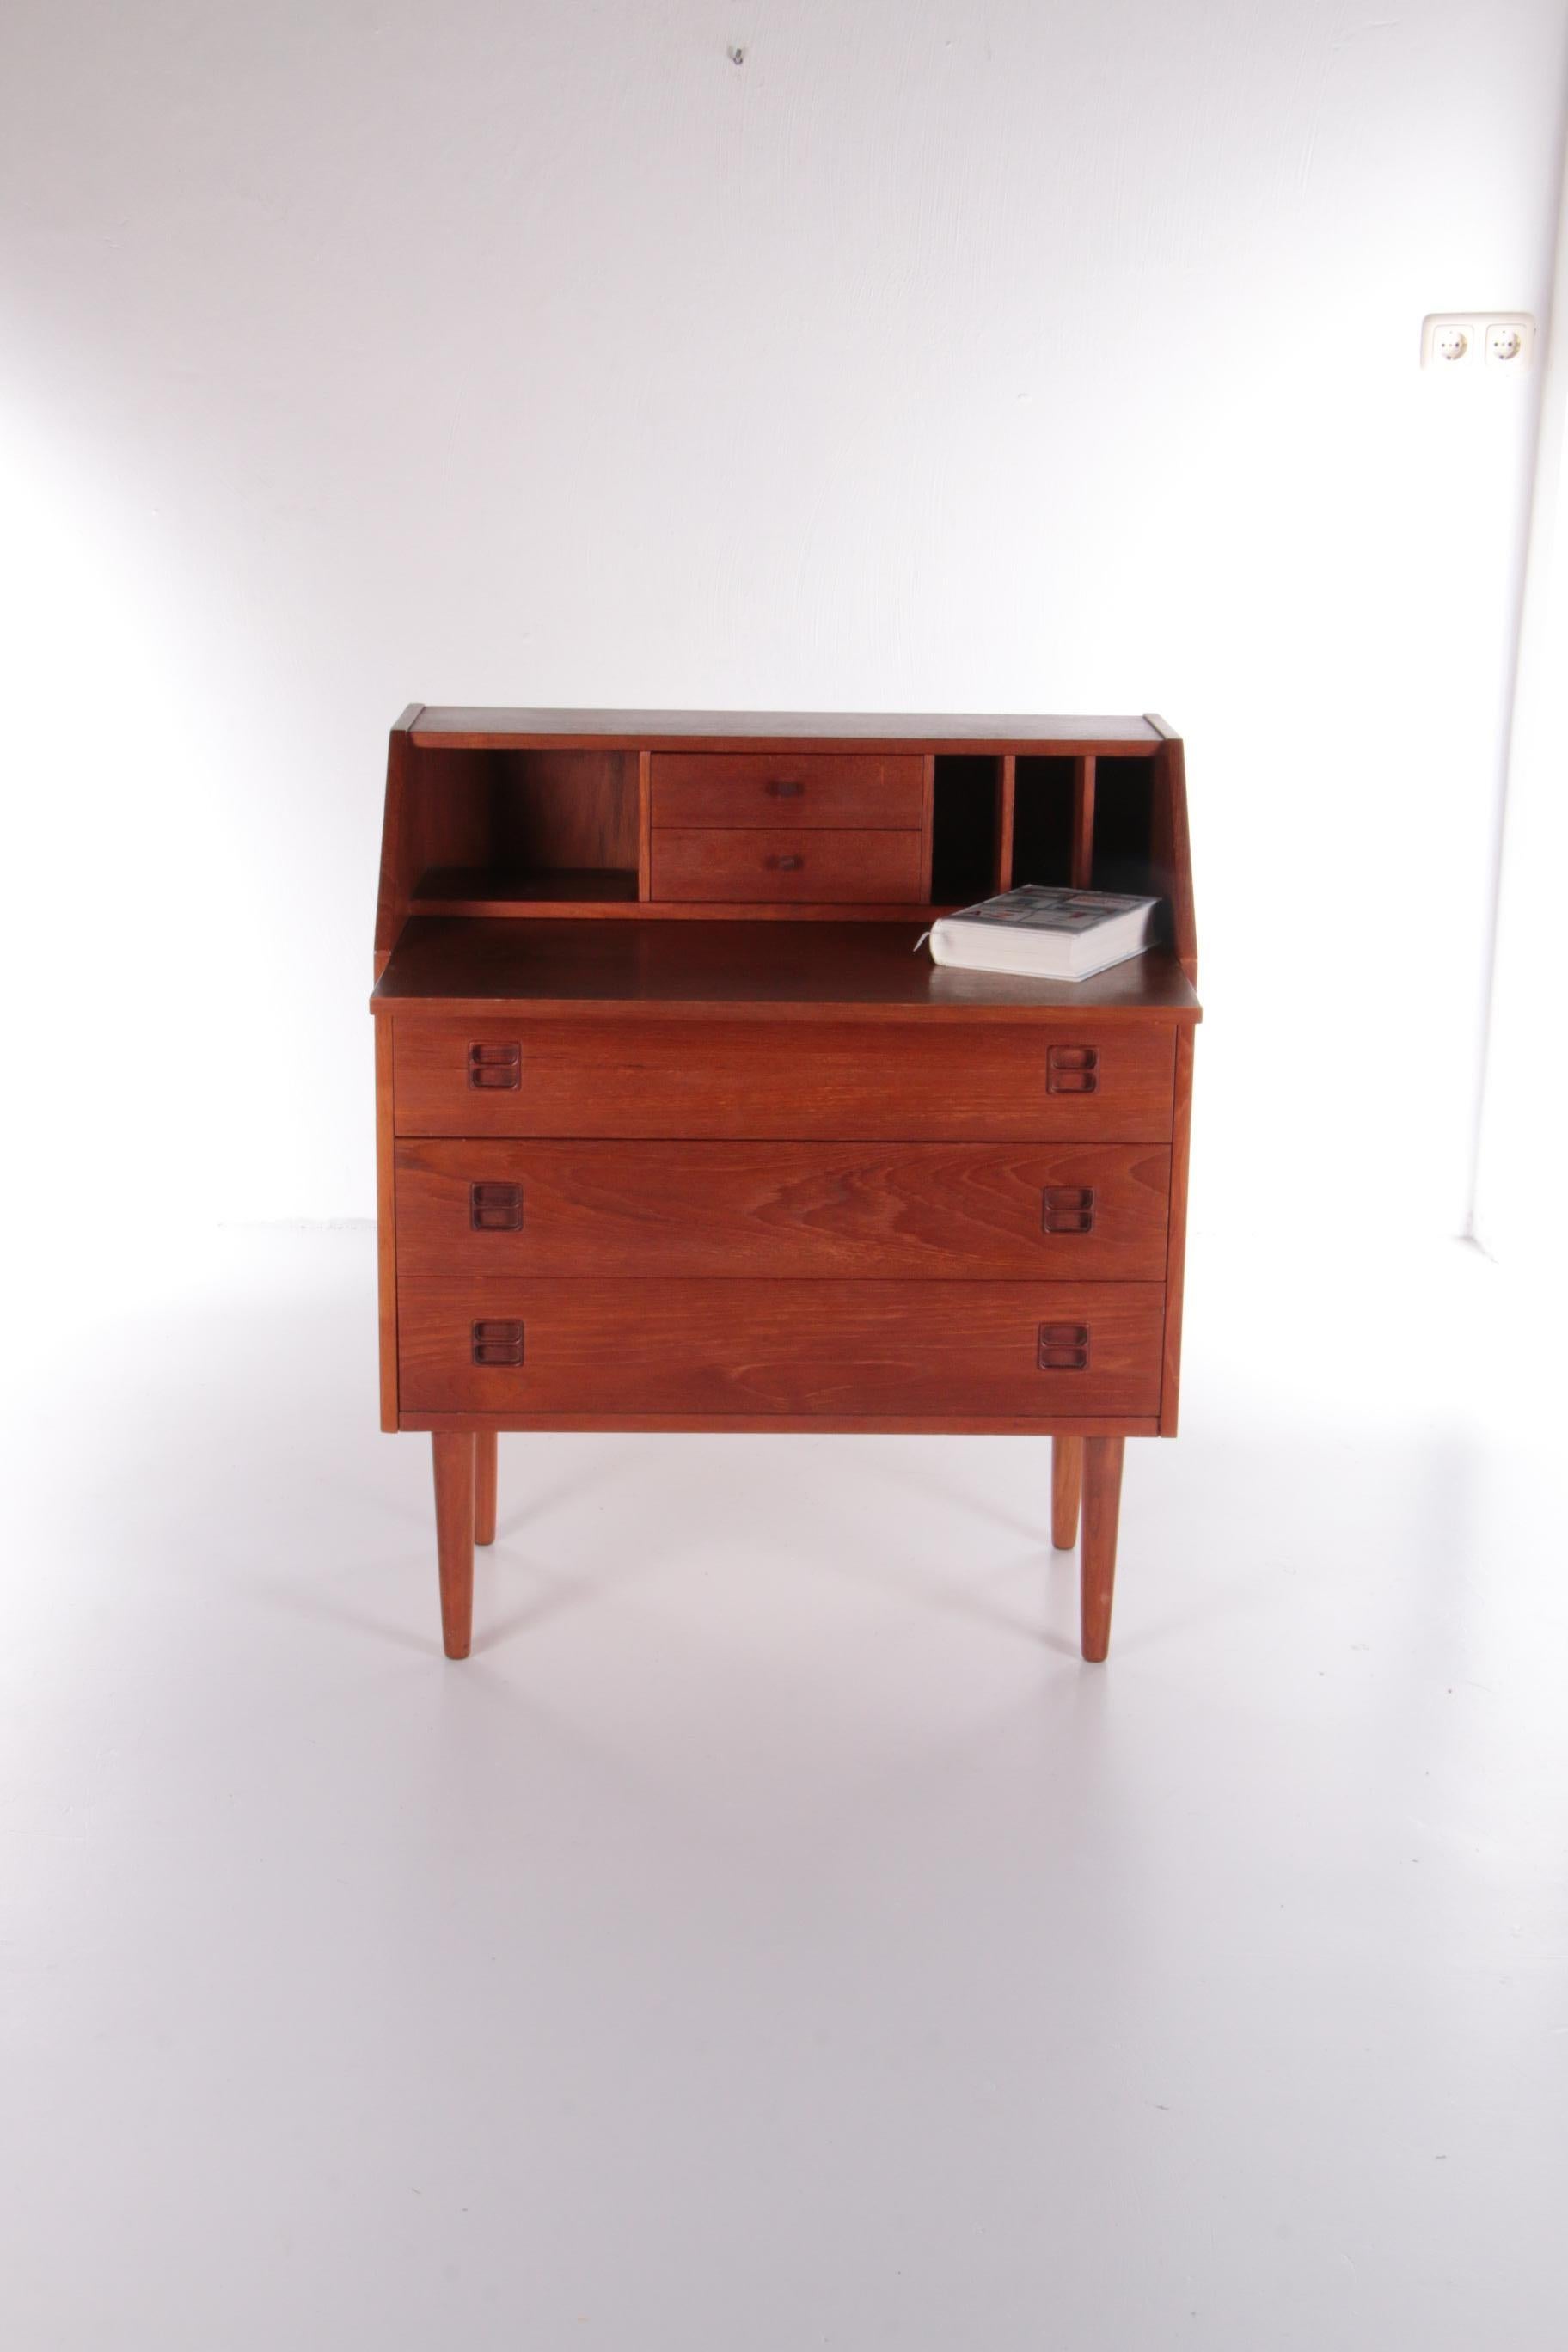 Vintage Danish design teak secretaire produced in the 1960s.

The secretary has a pull-out worktop with 3 drawers and 2 small drawers underneath for extra storage space. The secretary stands on elegant high legs.

With this secretary you can